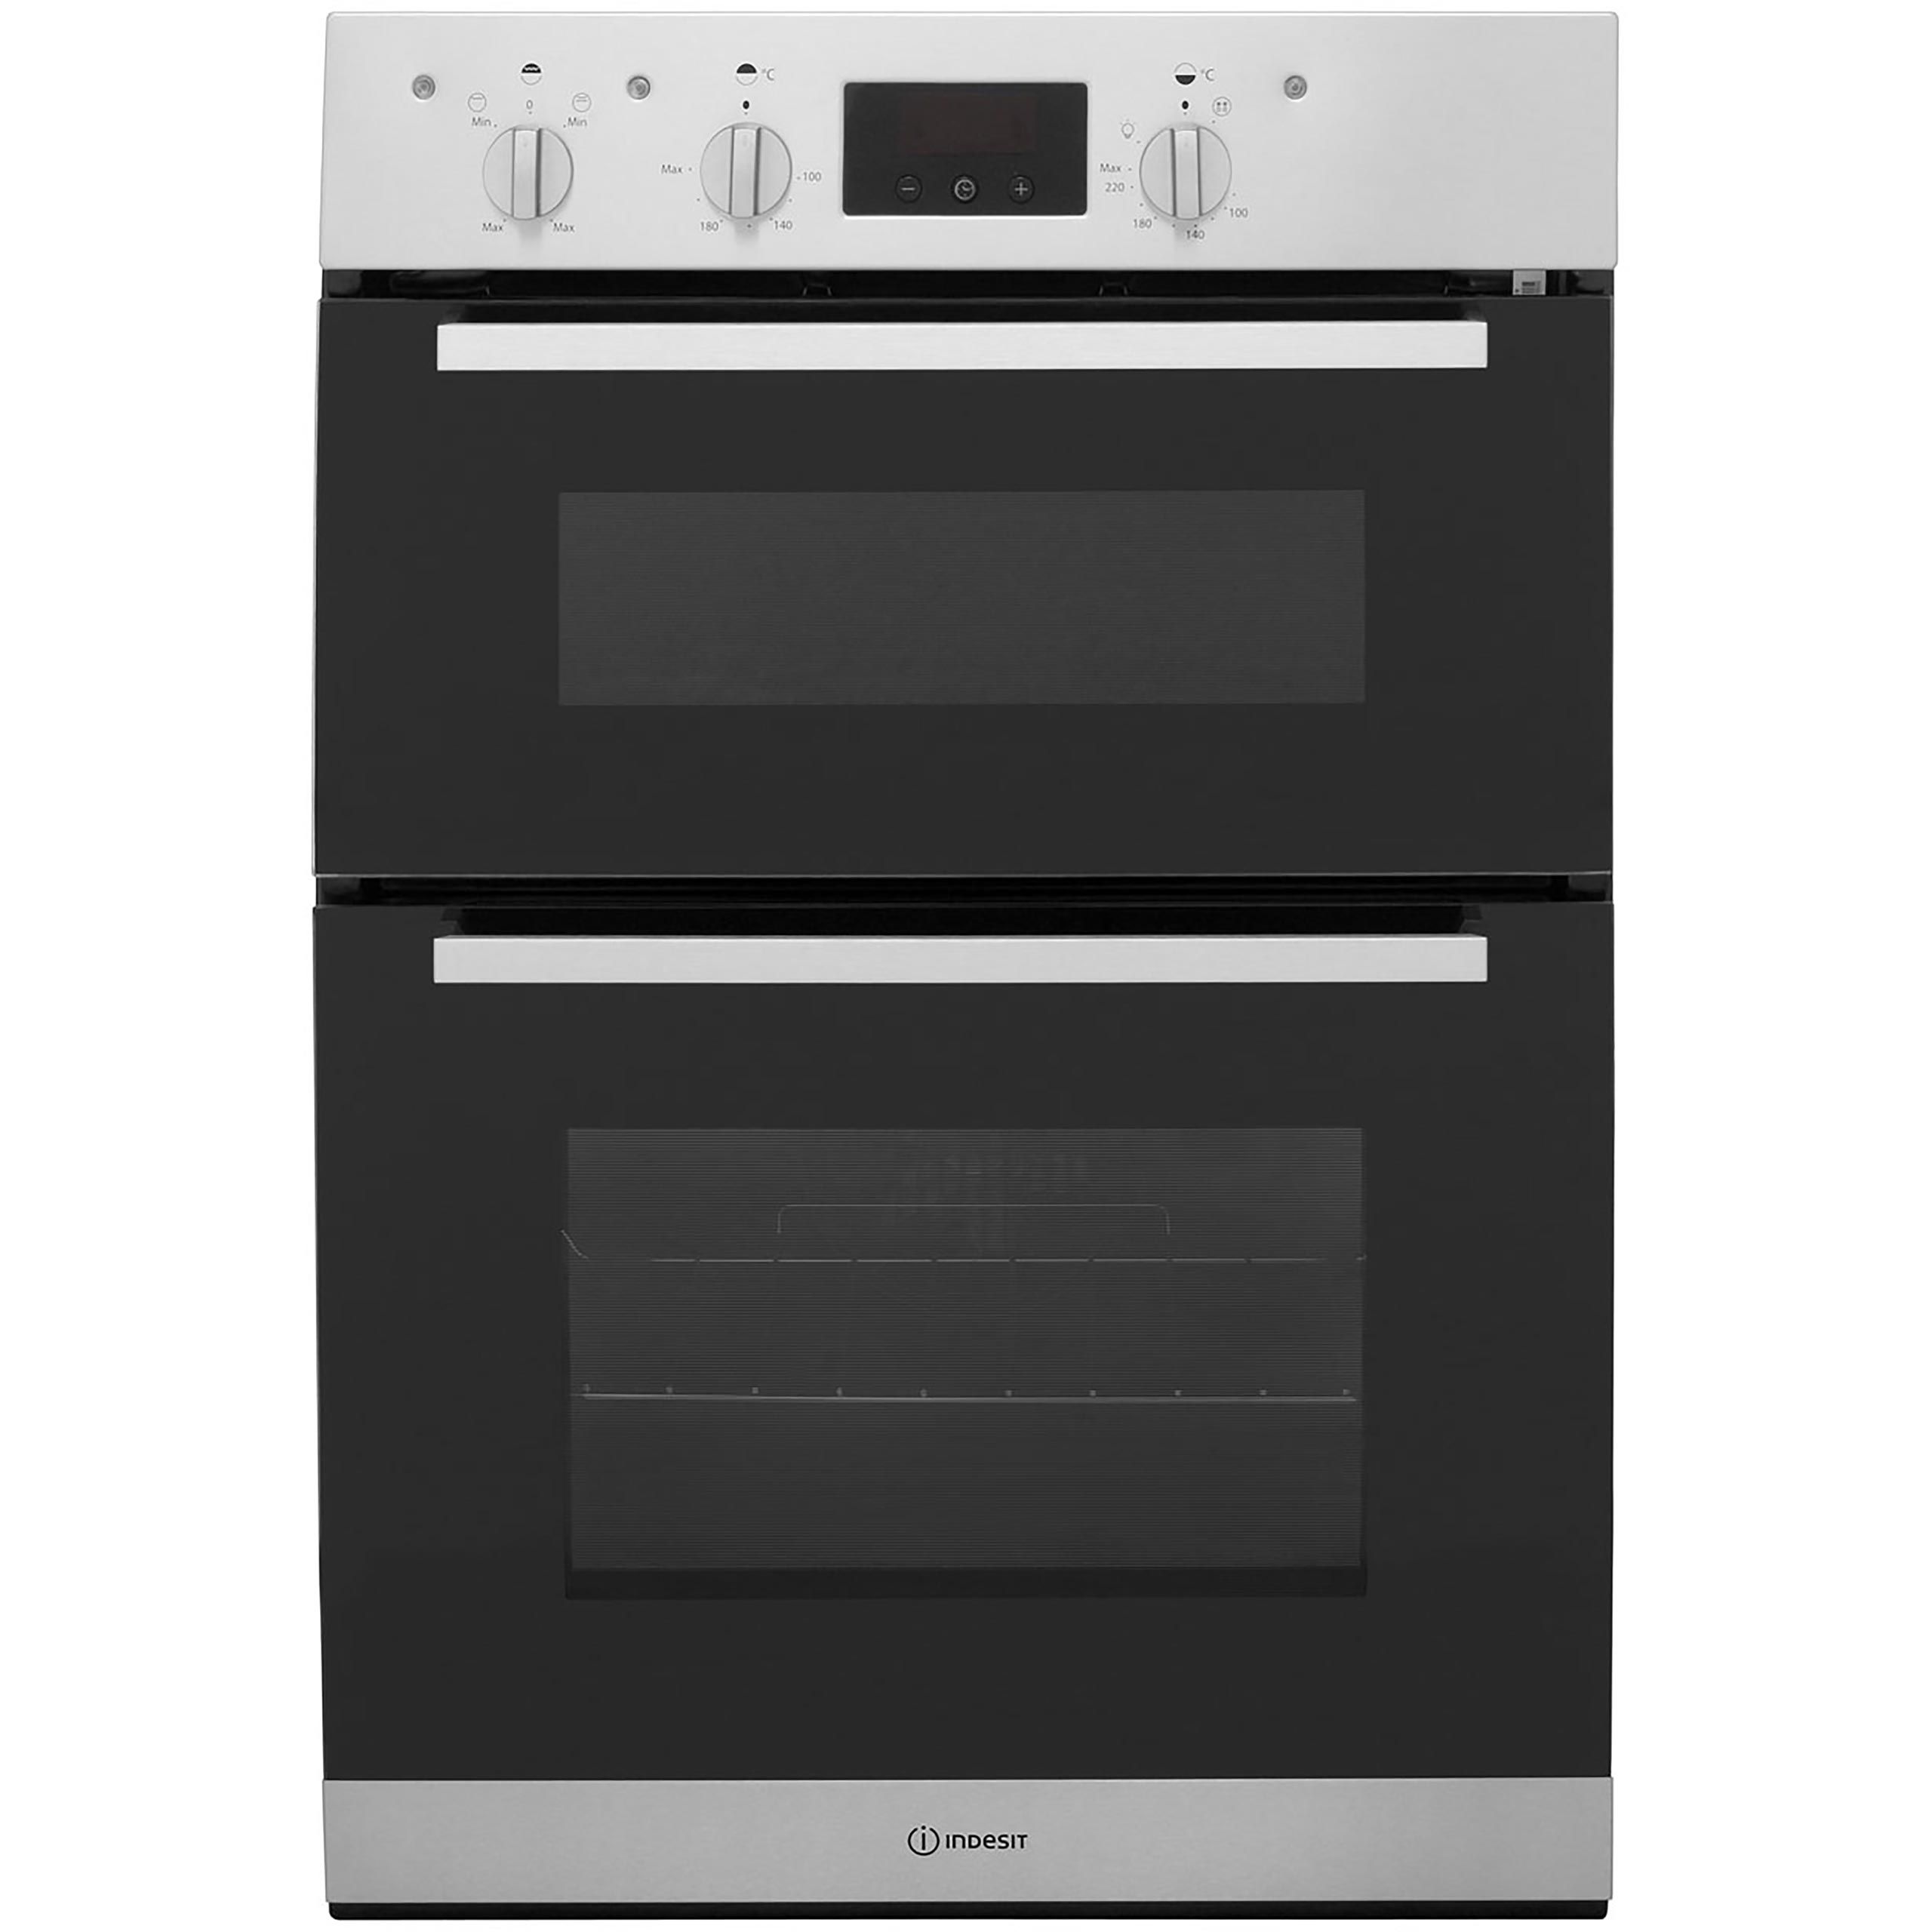 Indesit Aria IDD6340IX Built In Electric Double Oven - Stainless Steel - A/A Rated, Stainless Steel